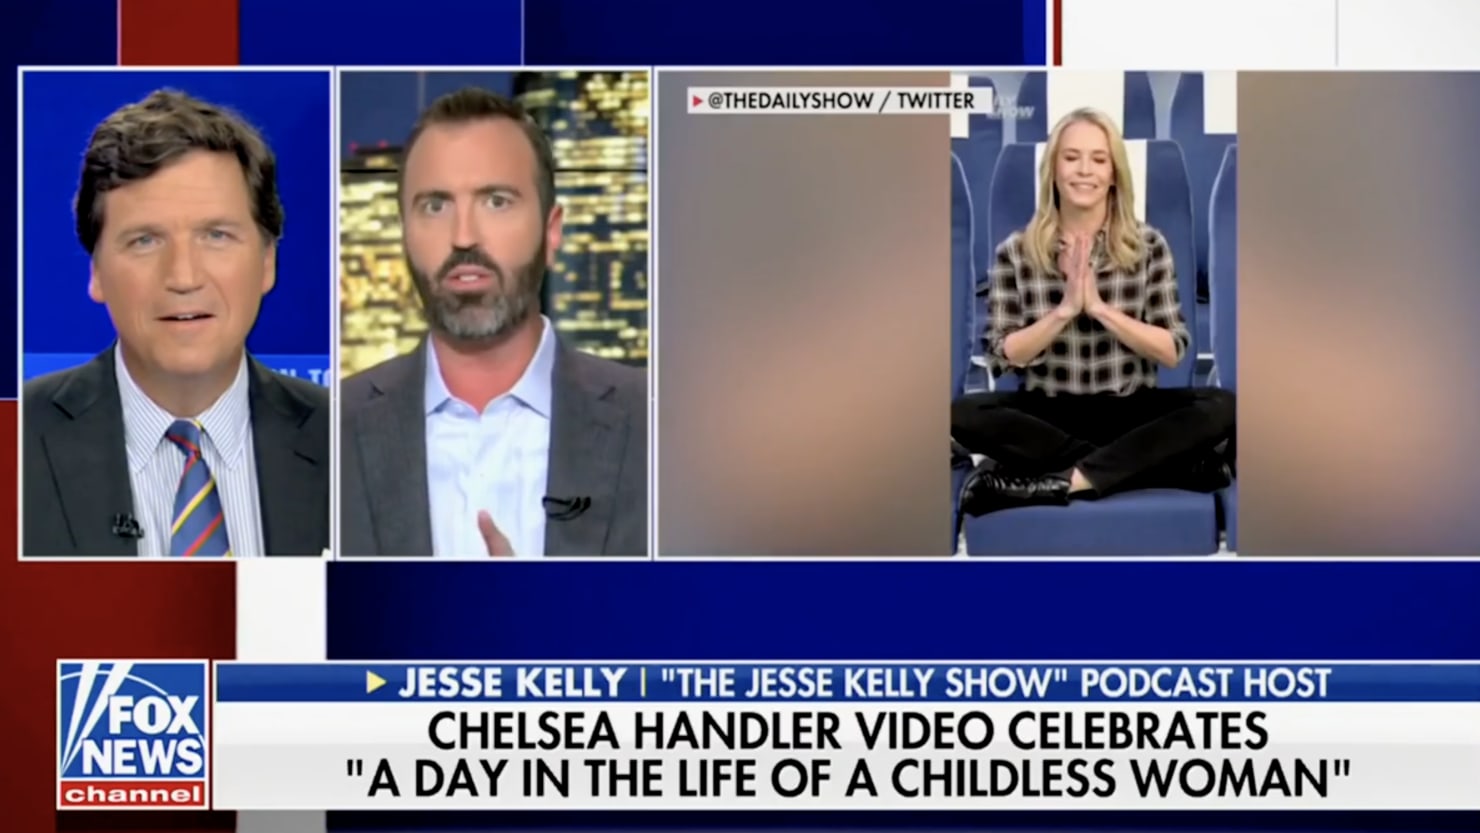 Tucker Carlson Guest Has Wildly Sexist Take on Chelsea Handler